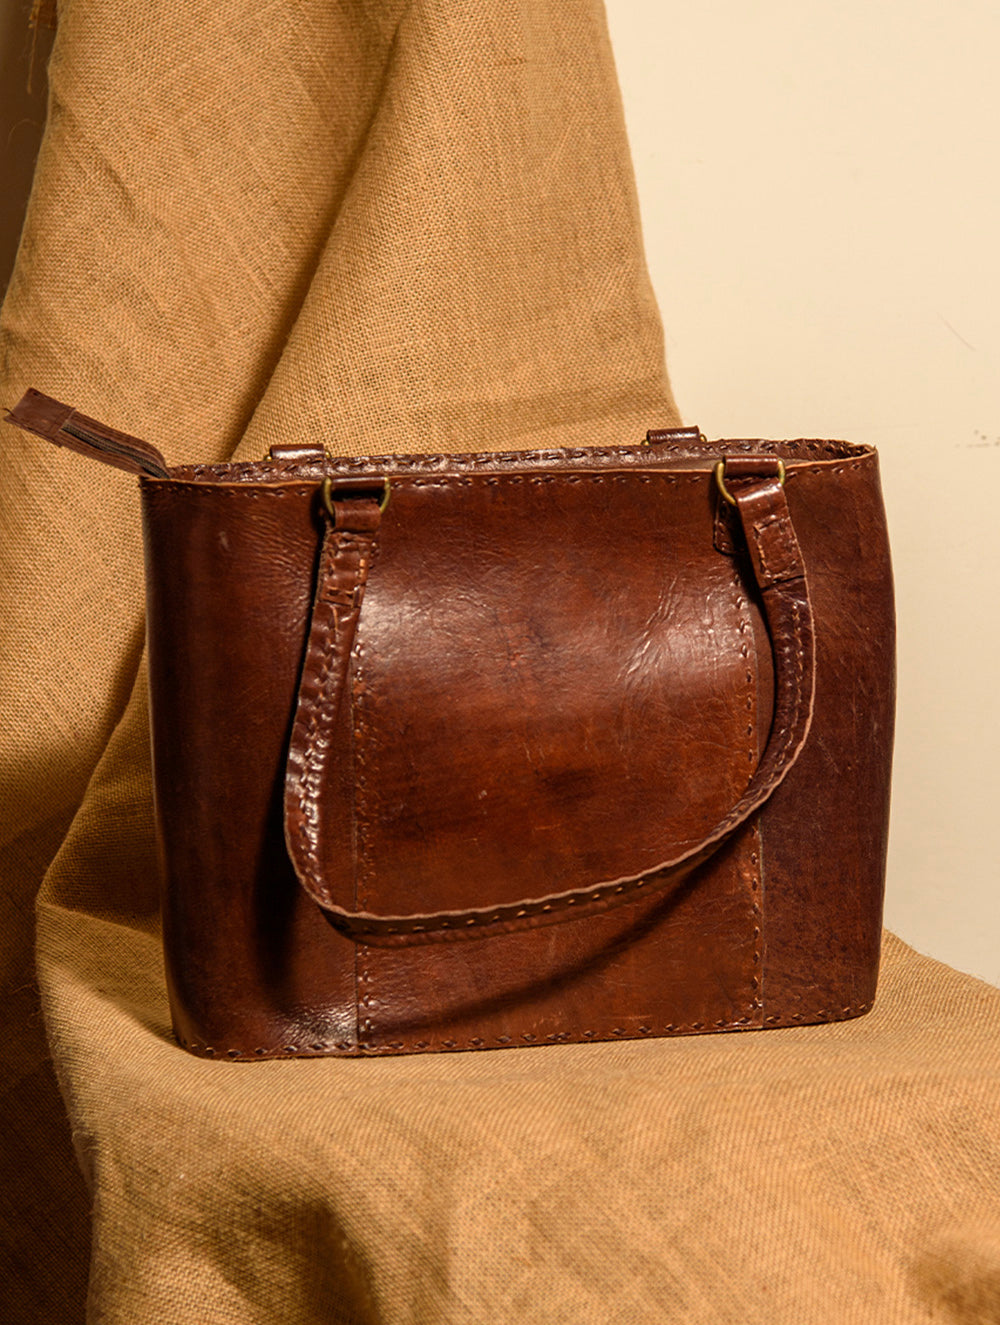 Load image into Gallery viewer, Handcrafted Jawaja Leather Tote Bag with Hand Stitch Detail